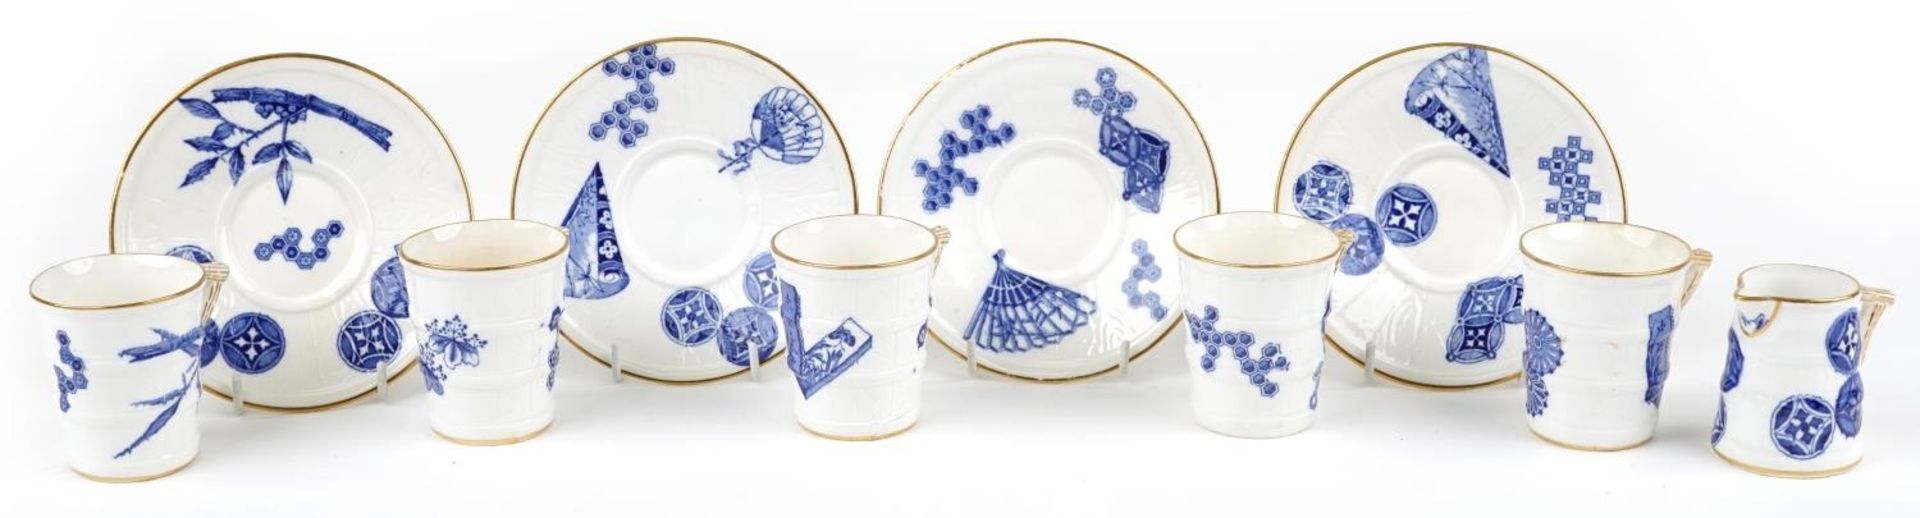 Royal Worcester, Victorian aesthetic naturalistic teaware decorated in the chinoiserie manner with - Bild 2 aus 7